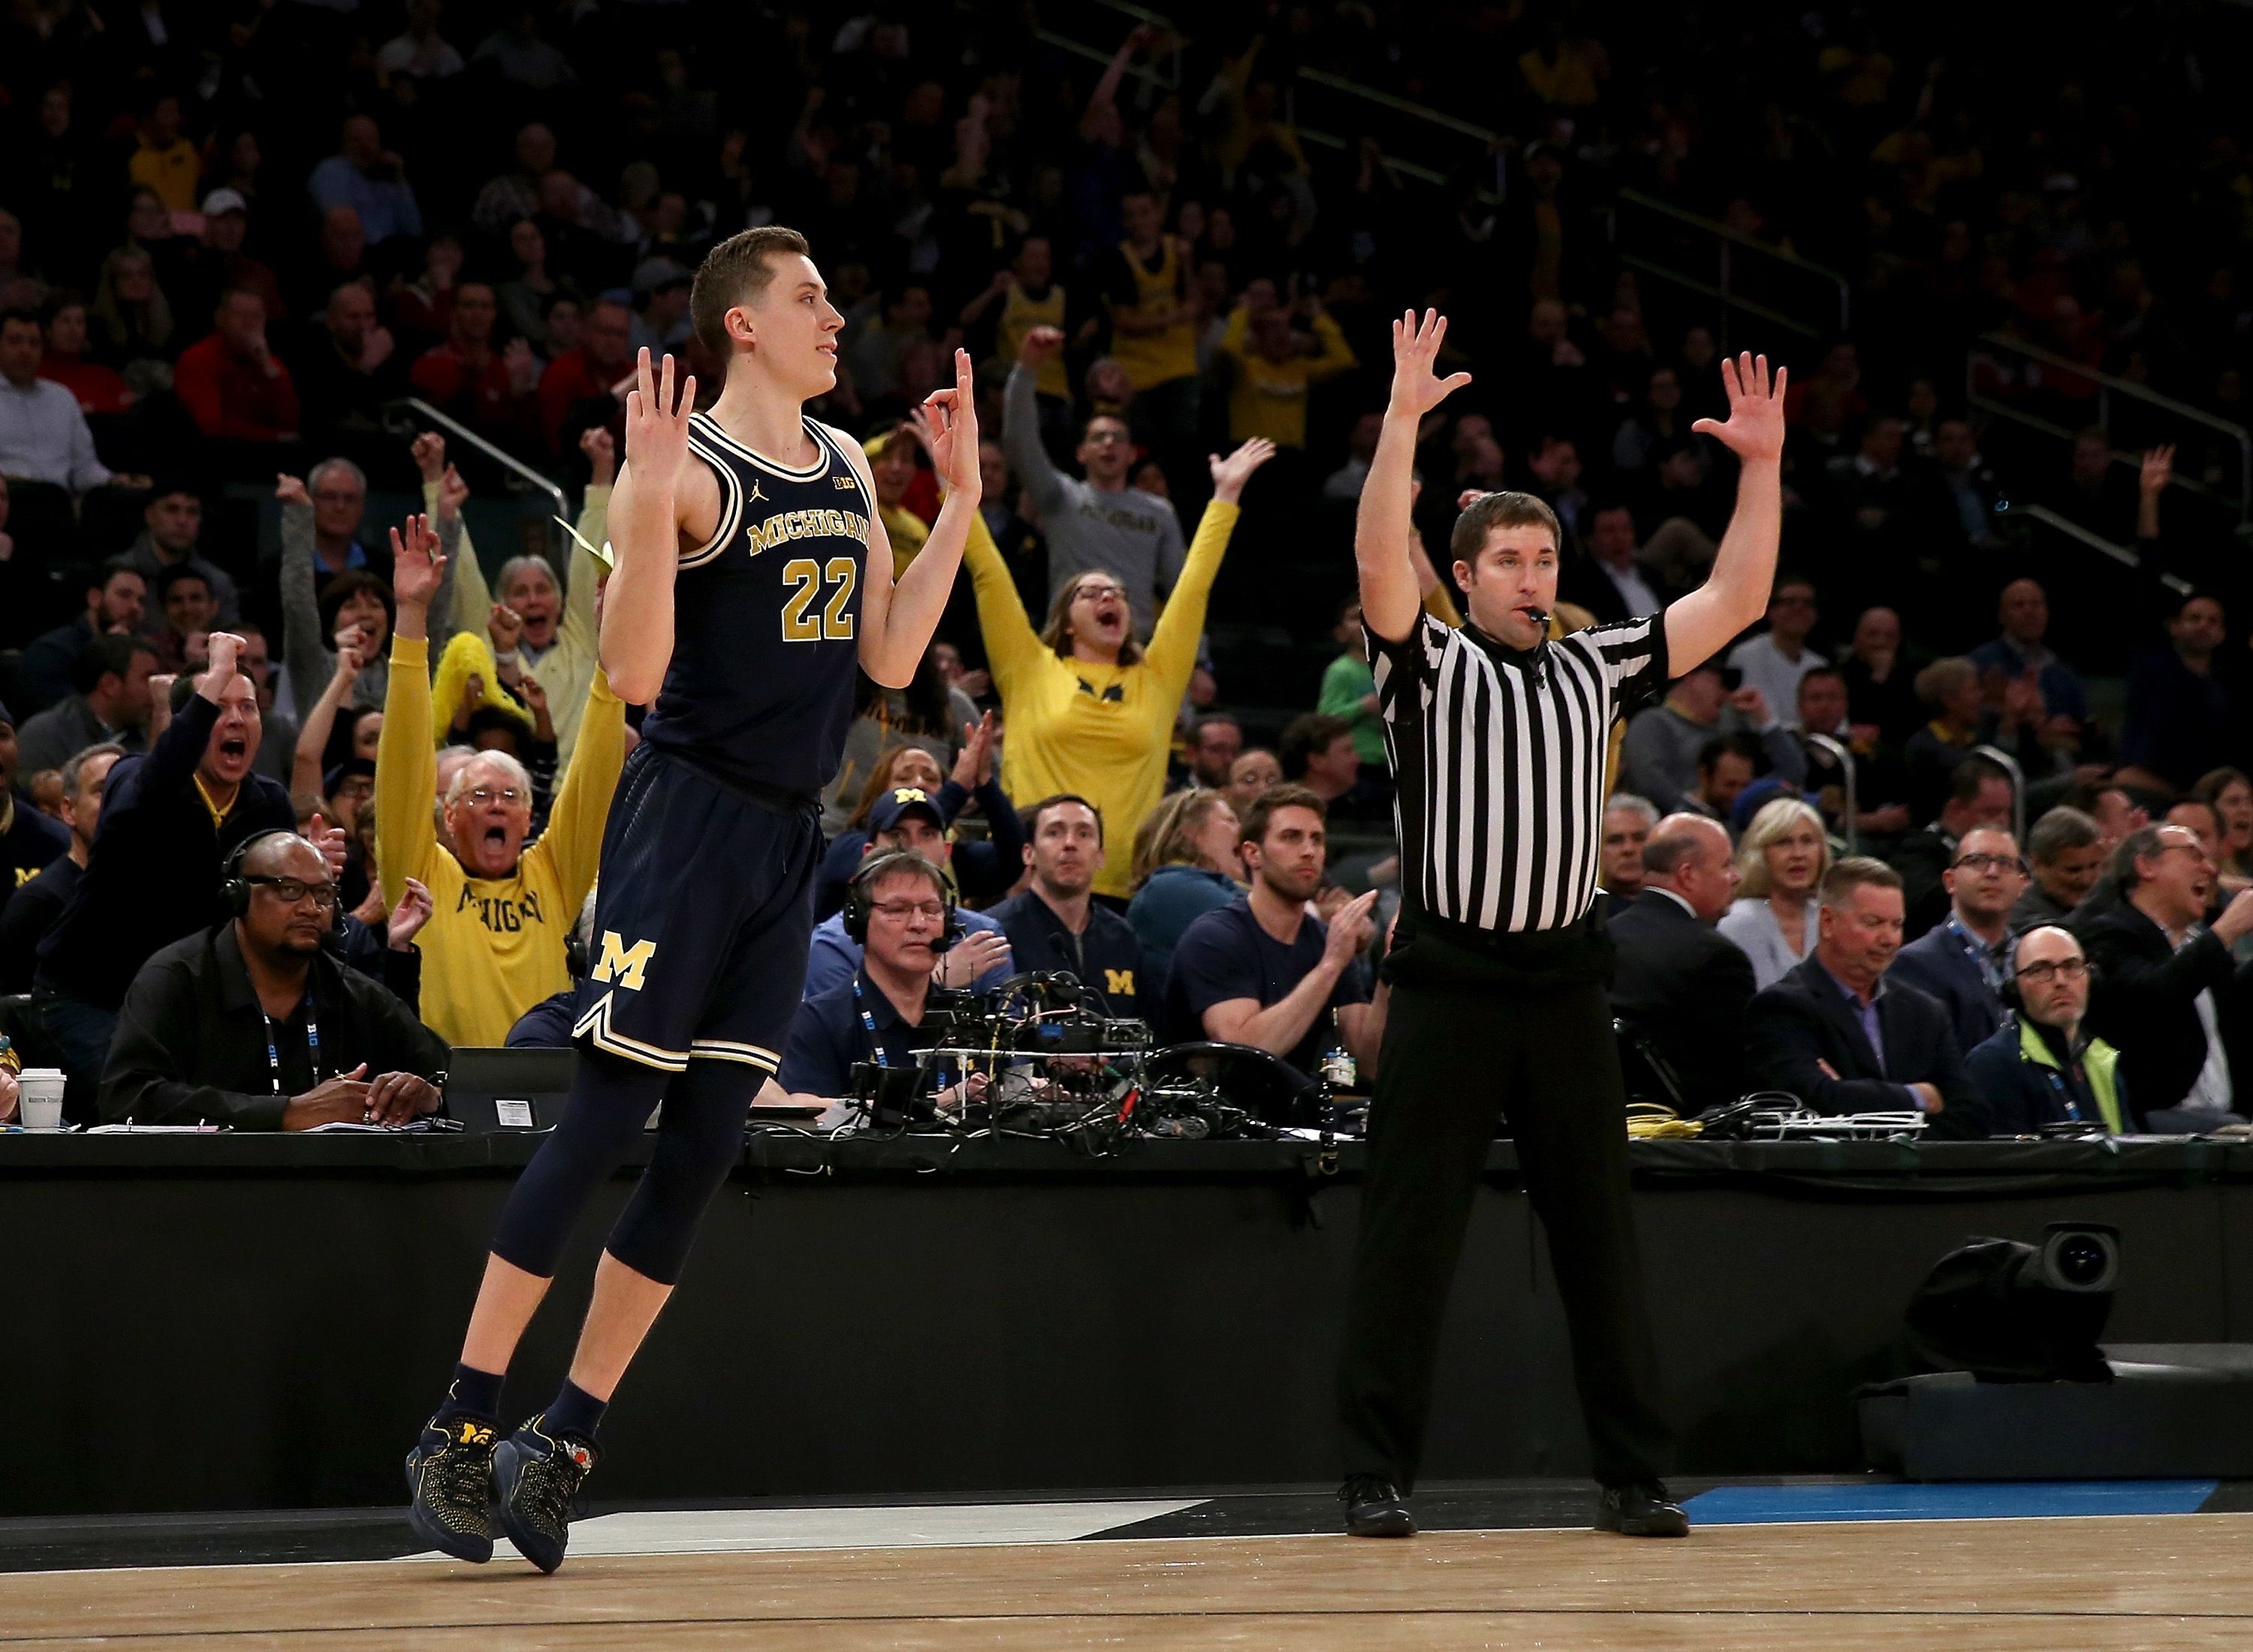 Michigan Basketball projected as No.3 seed to Dallas in bracketology